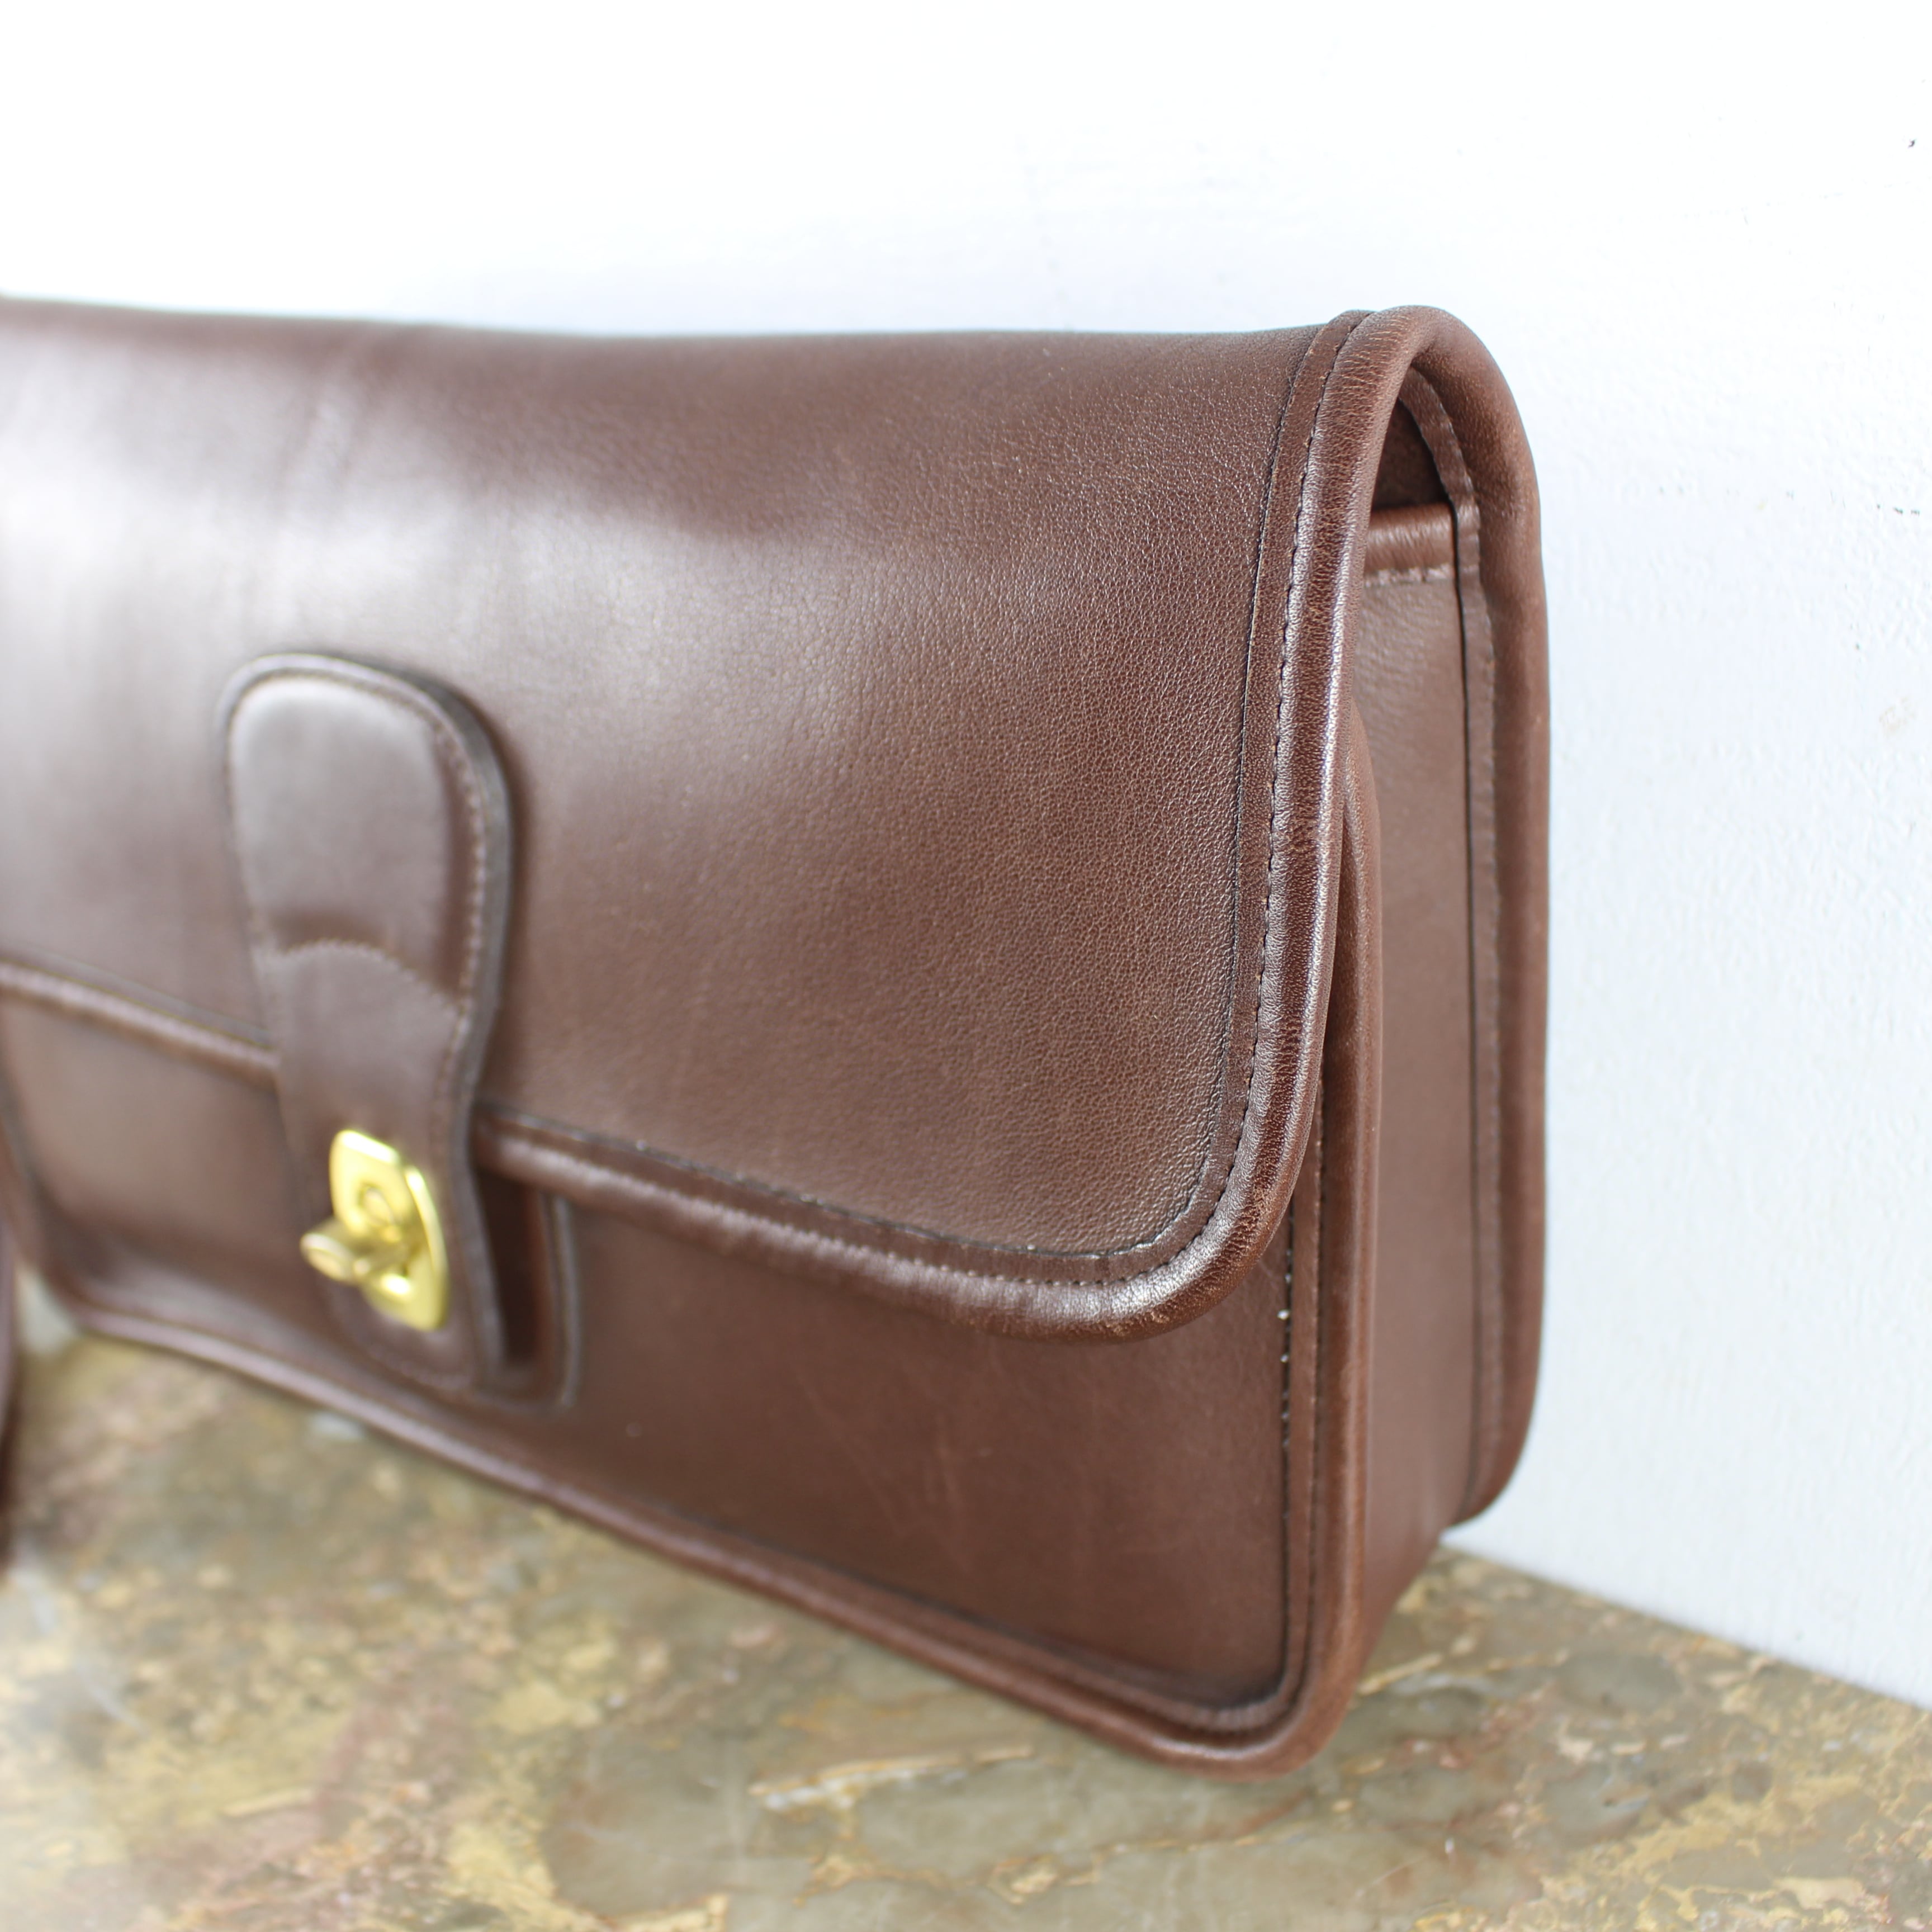 OLD COACH TURN LOCK LEATHER CLUTCH BAG MADE IN USA/オールドコーチ 